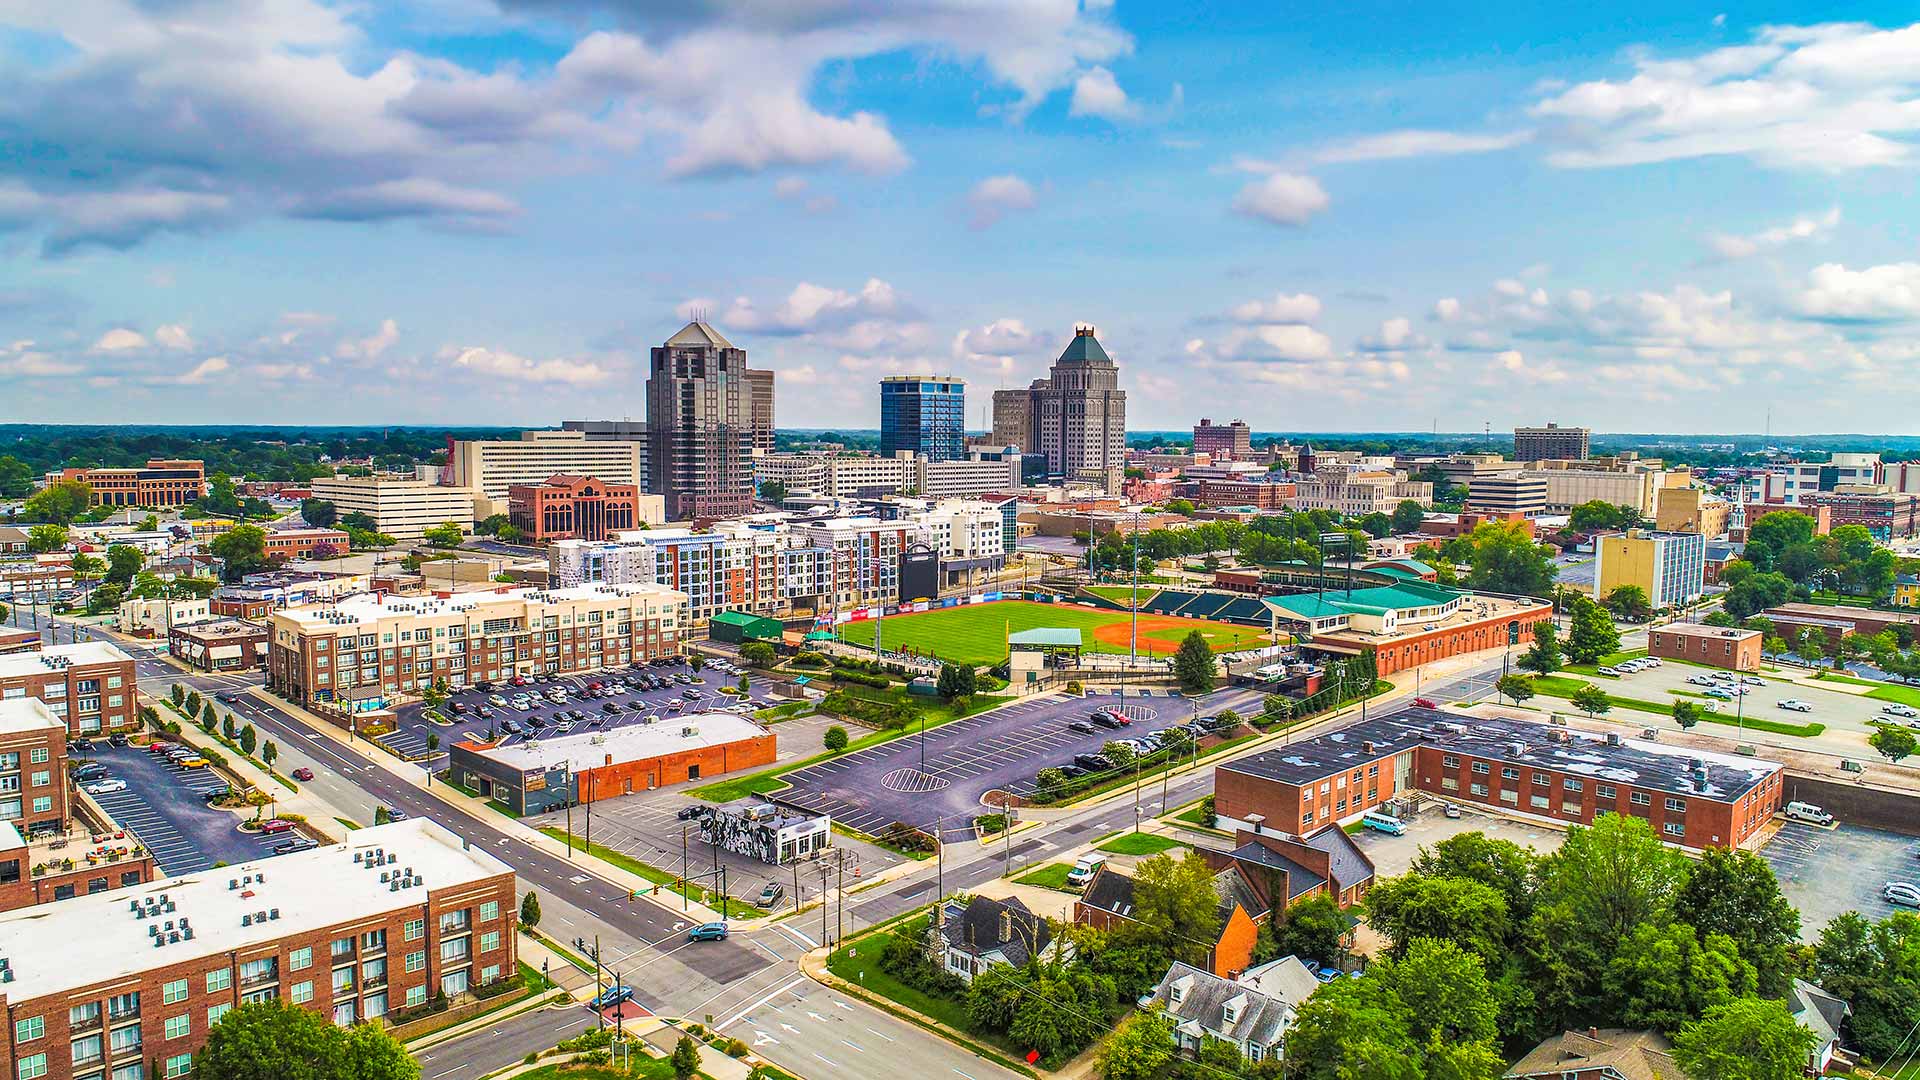 Aerial photo of downtown Greensboro, NC.